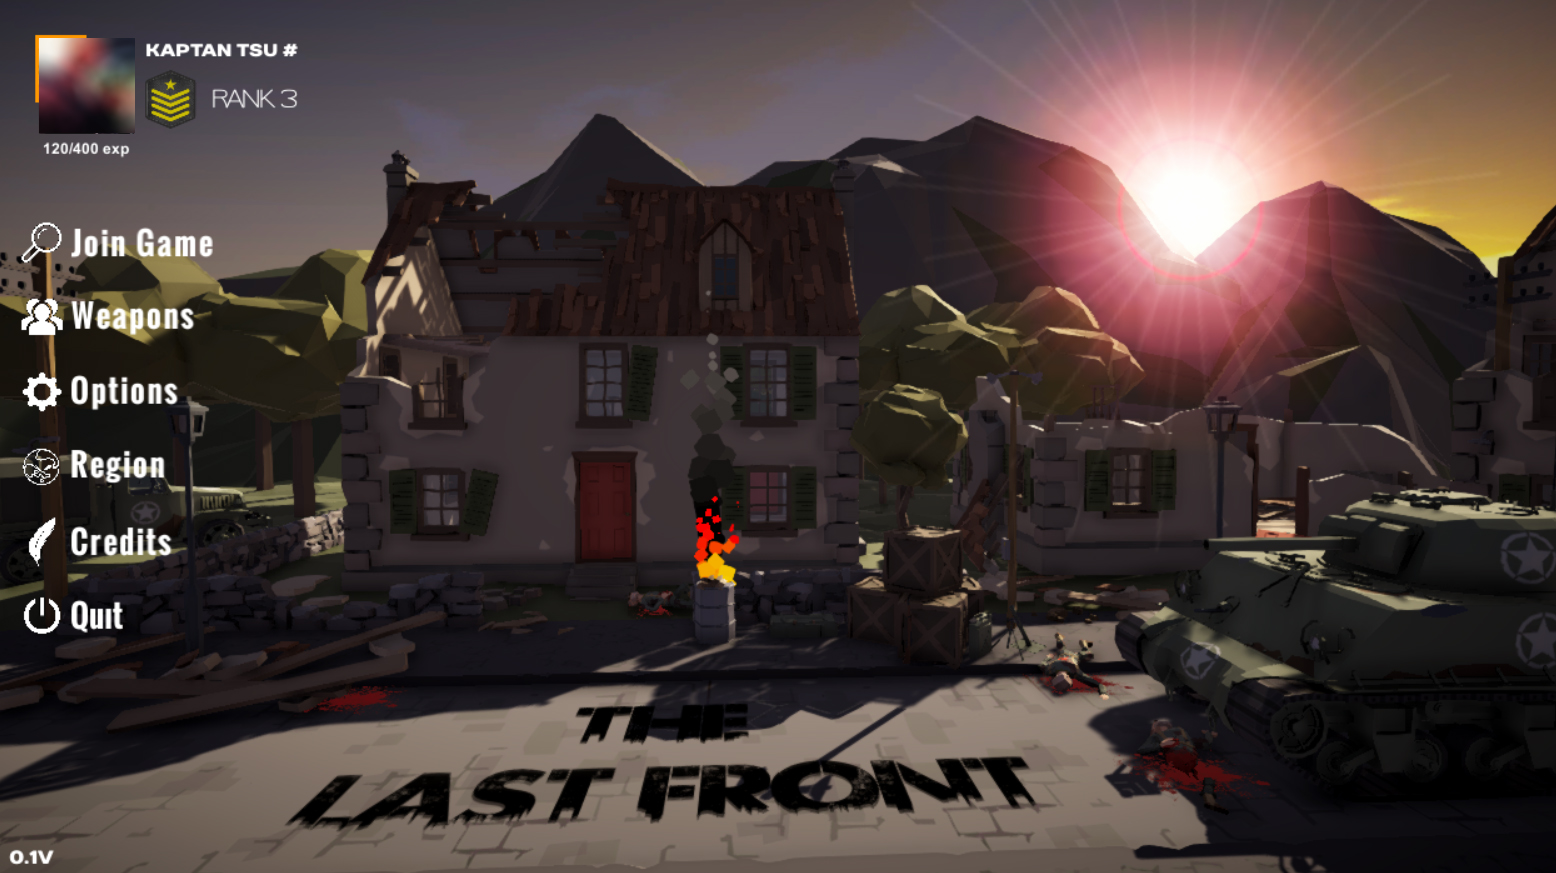 The Last Front Featured Screenshot #1